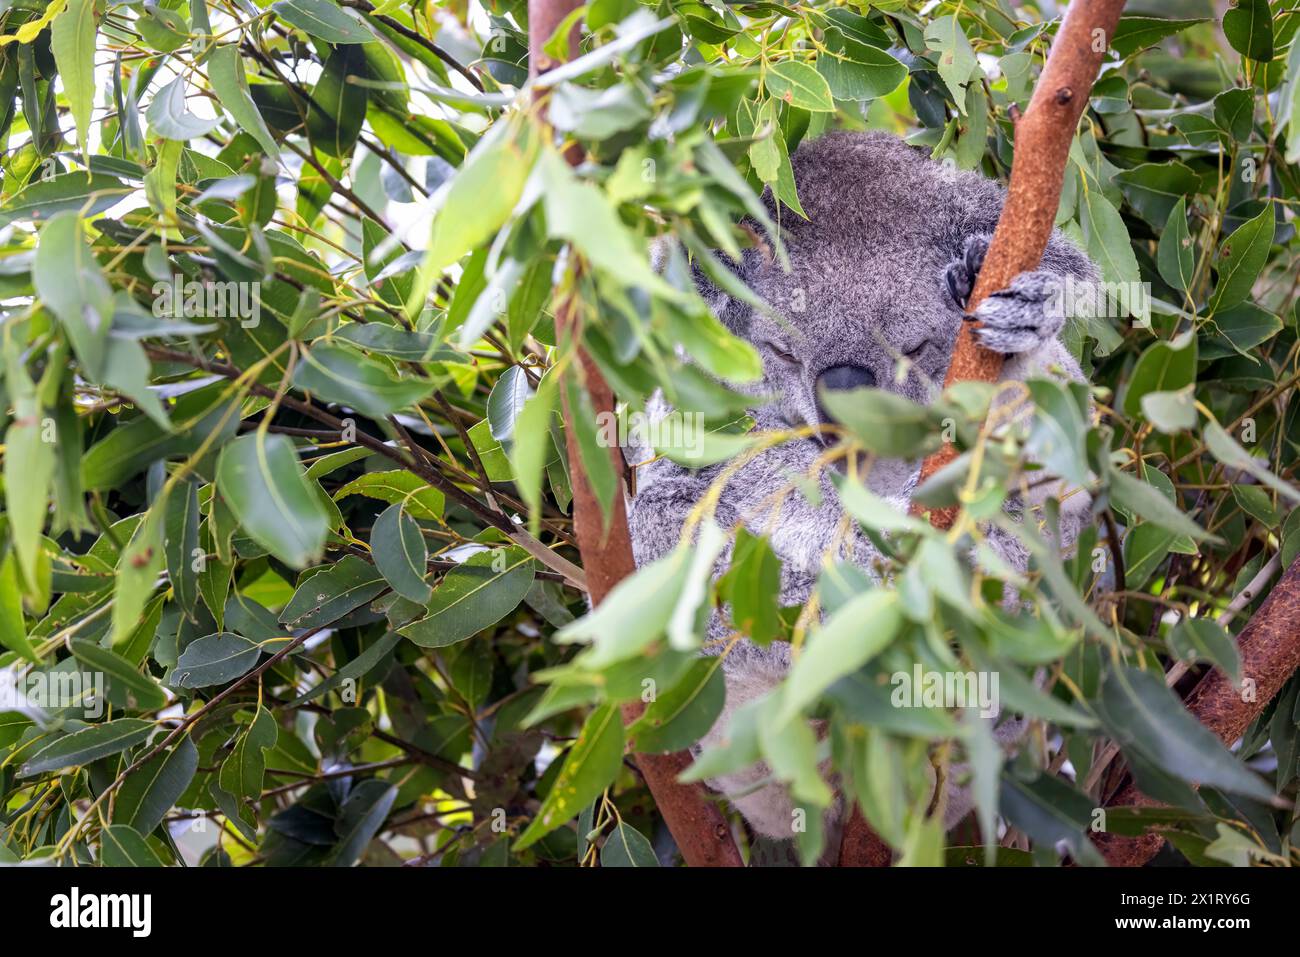 A koala, Phascolarctos cinereus, curled up and sleeping in a eucalyptus tree, Australia. This cute marsupial is endangered in the wild. Stock Photo